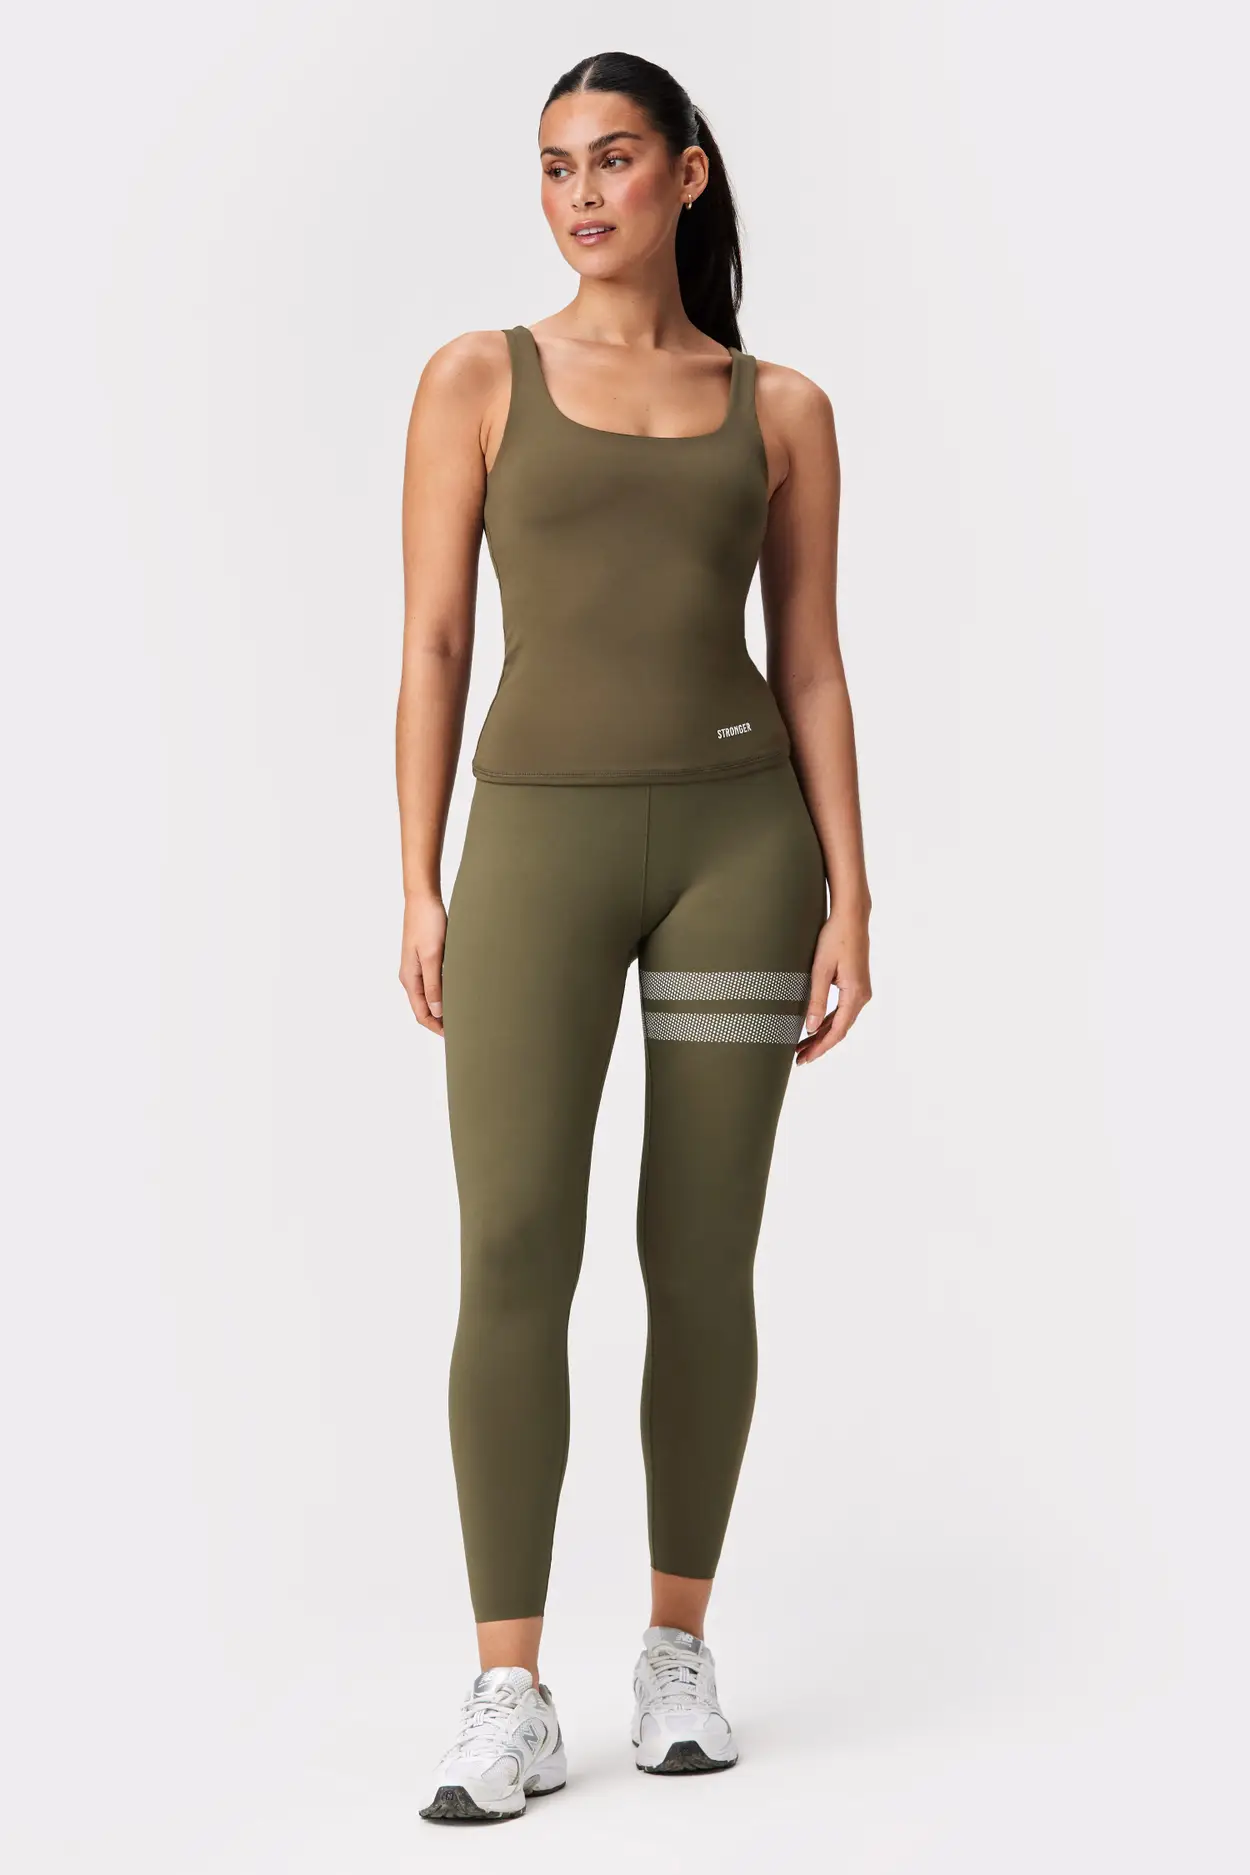 All In Motion Ultra High Rise 7/8 Legging Contour Curvy Olive Green Size XS